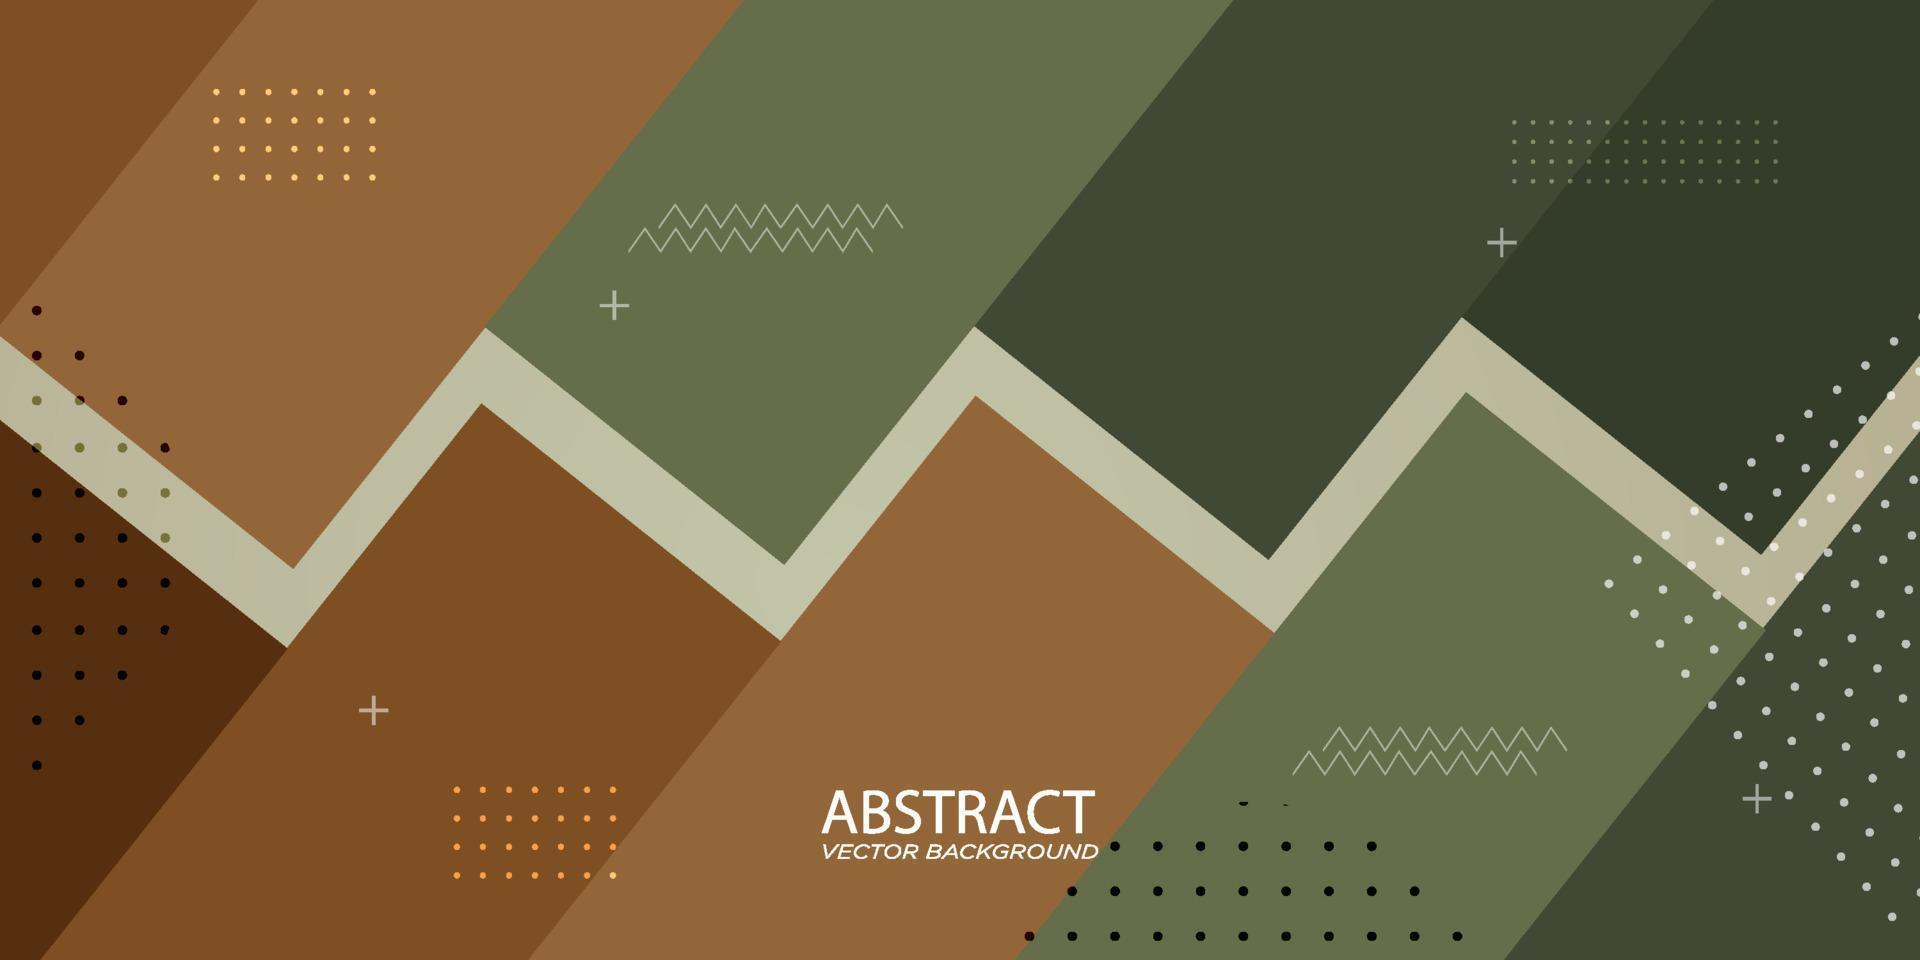 Abstract background geometric art in green, brown, beige. Seamless horizontal lines zigzag background graphic for retro design or other modern ads.Eps10 vector